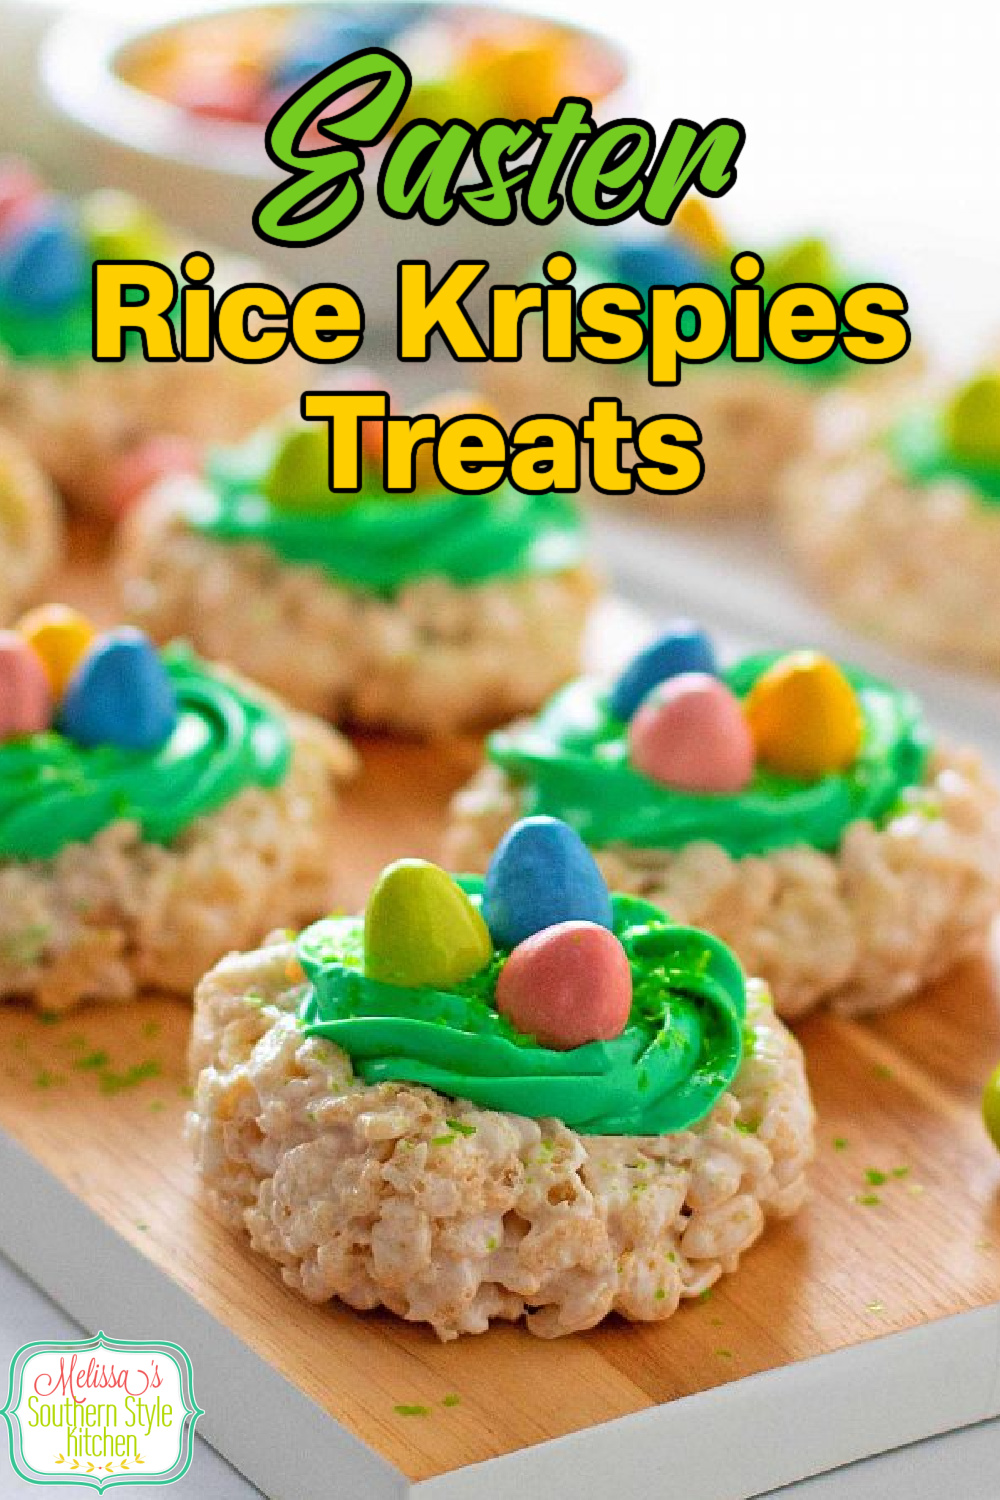 Kids of all ages will love these cute little Easter Rice Krispies Treats #easterdesserts #easterricekrispiestreats #eastercandy #ricekrispiestreats #easternests #ricekrispiestreatsnests